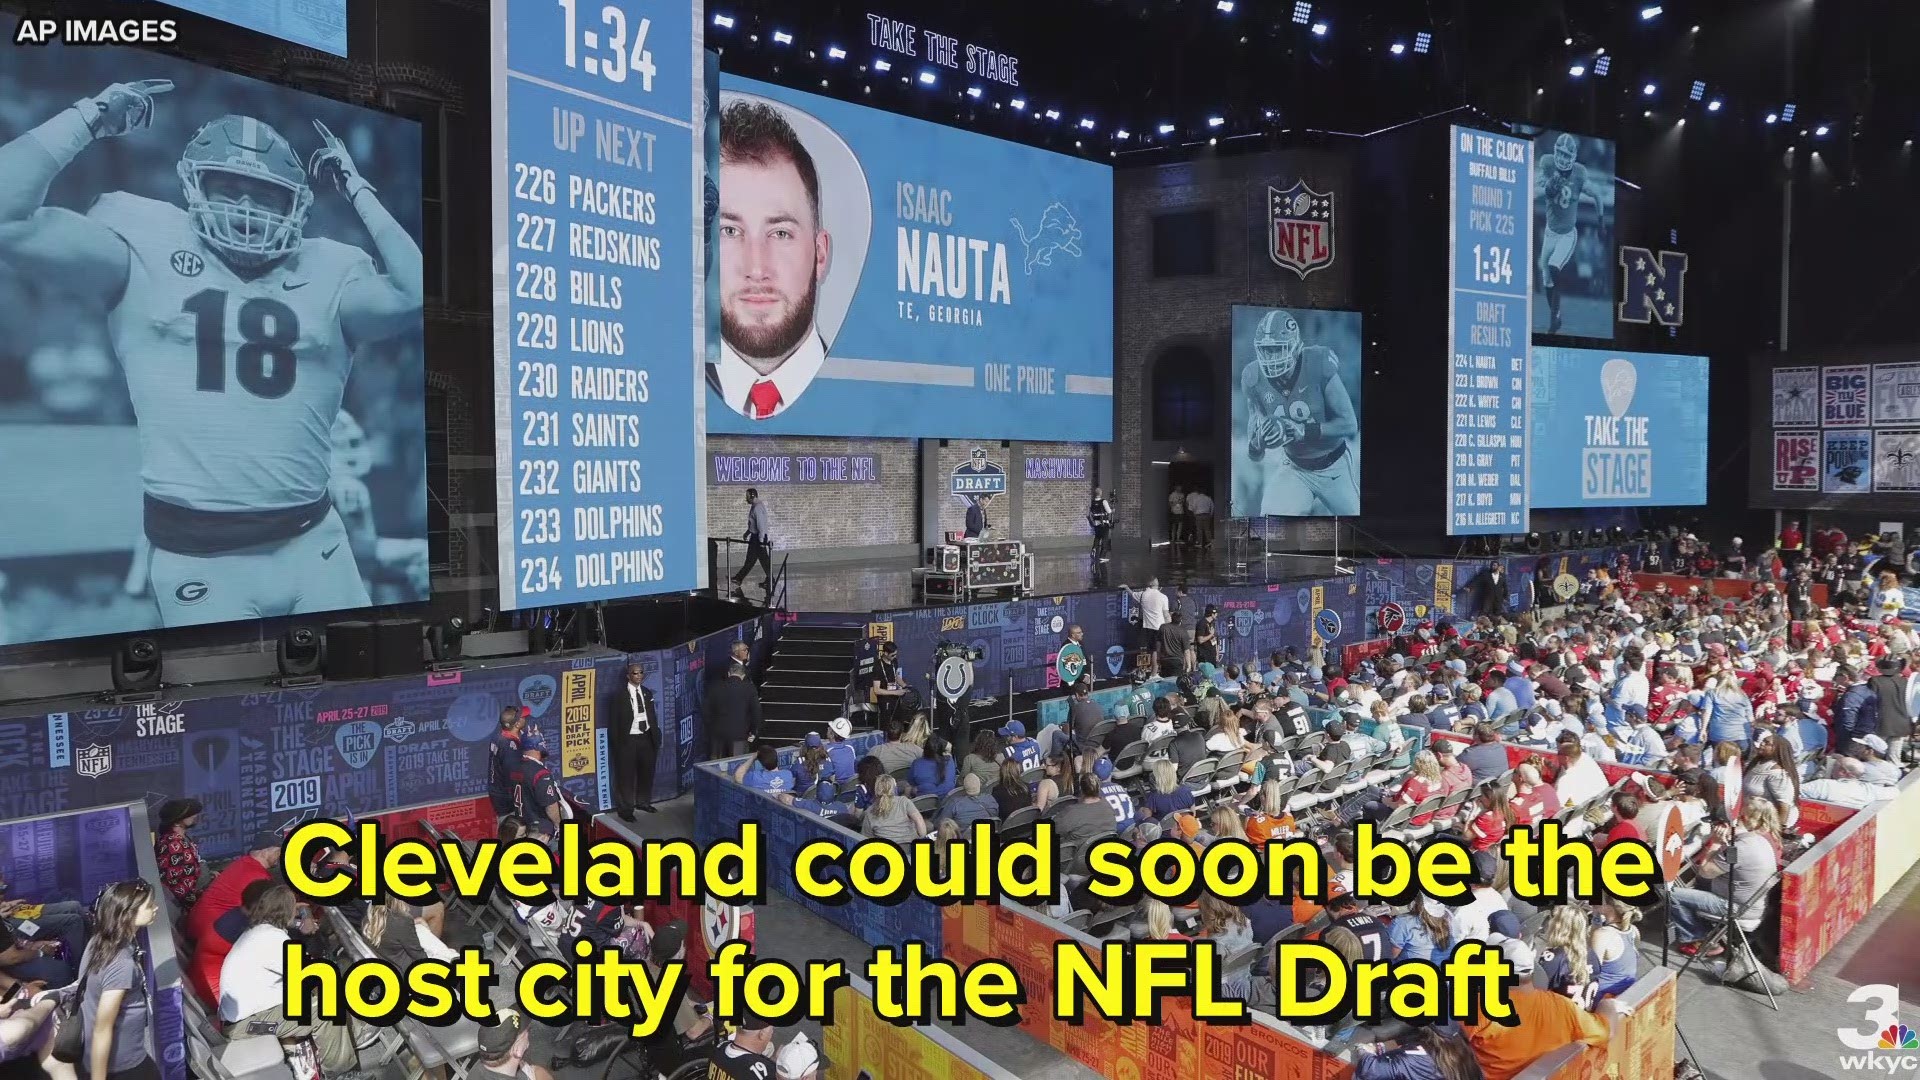 In a statement, the Browns said they are 'excited' by the prospect of Cleveland hosting the NFL Draft in the near future.